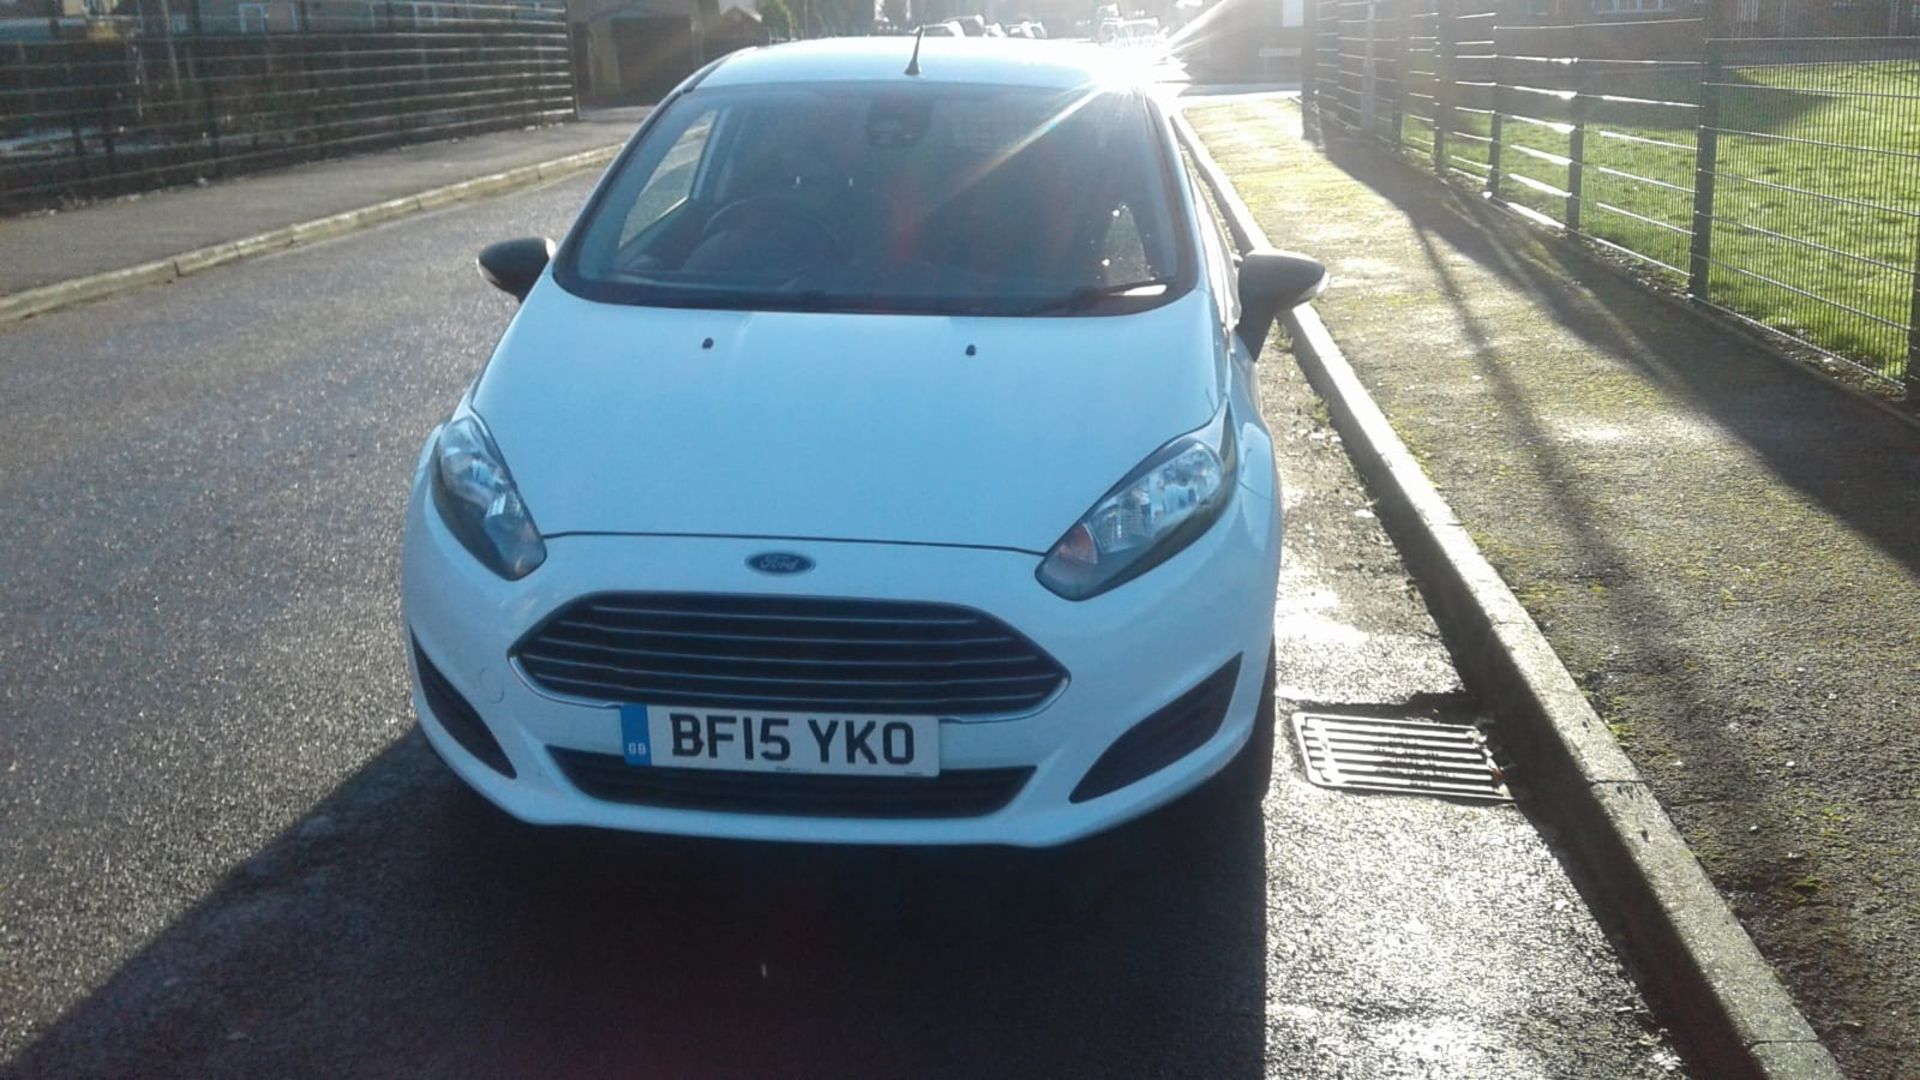 2015/15 REG FORD FIESTA ECONETIC TECH TDCI 1.6 CAR DERIVED VAN, SHOWING 0 FORMER KEEPERS *NO VAT* - Image 2 of 12